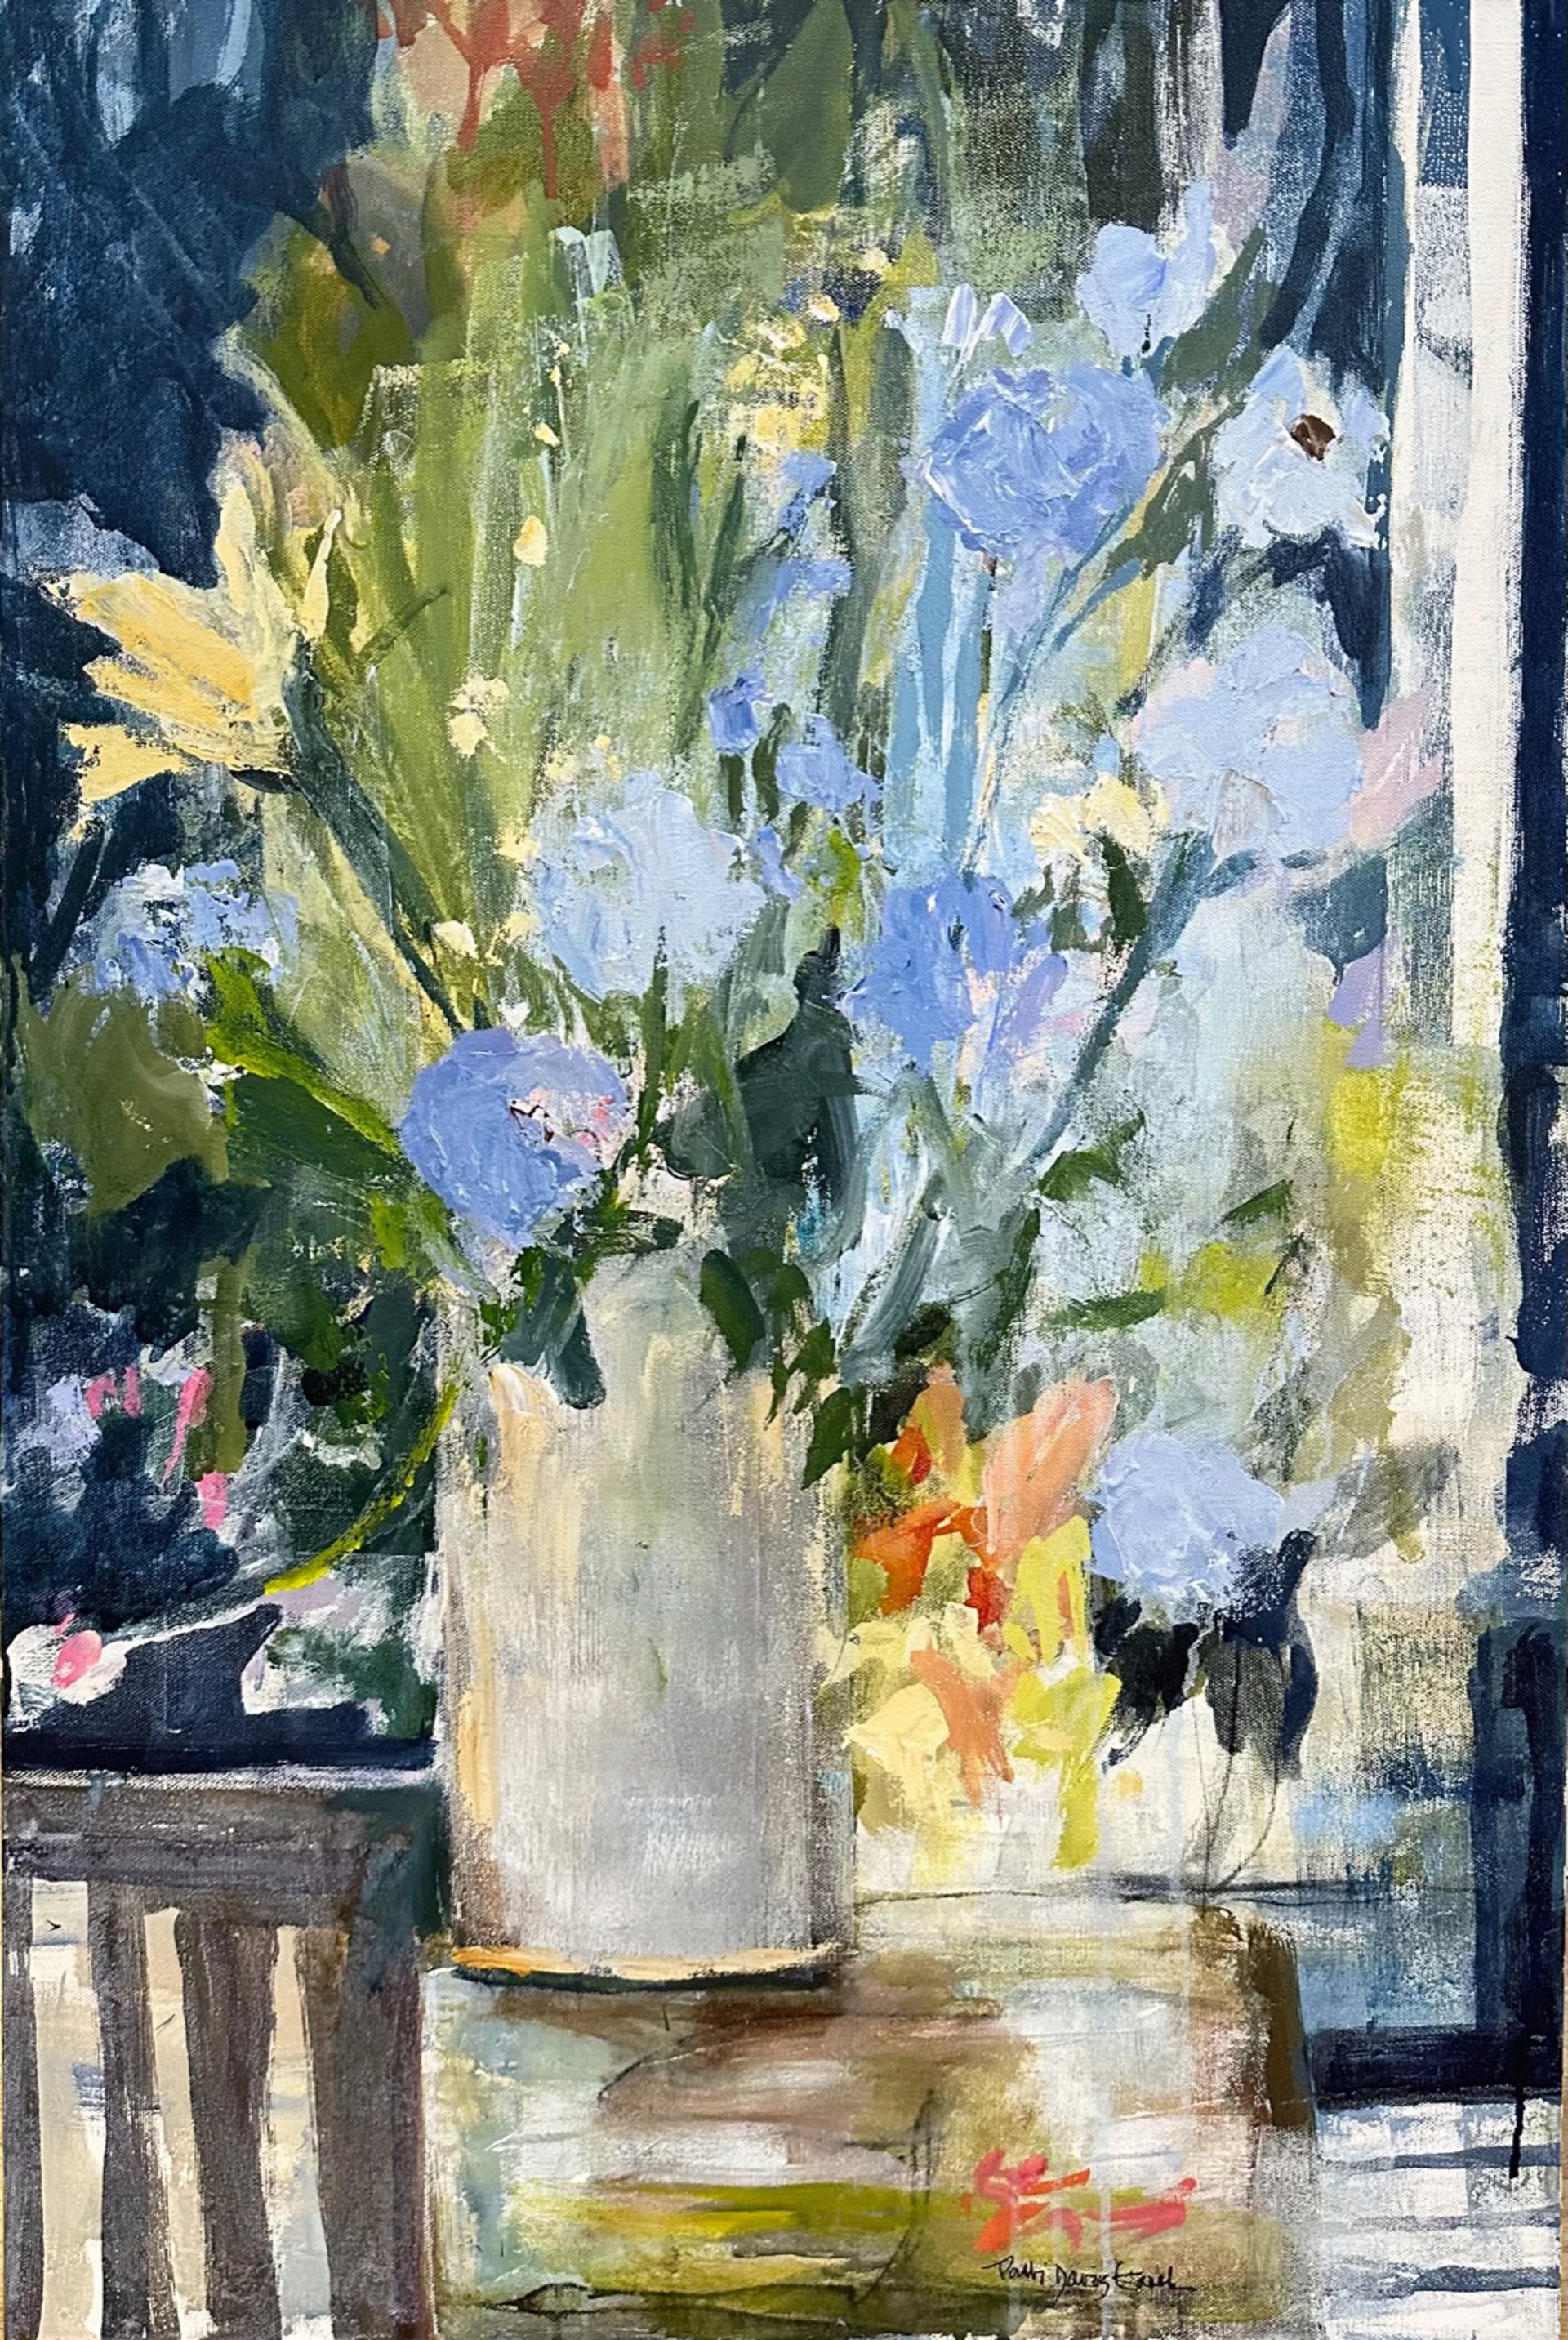 Late Spring Bouquet by Patti Ganek